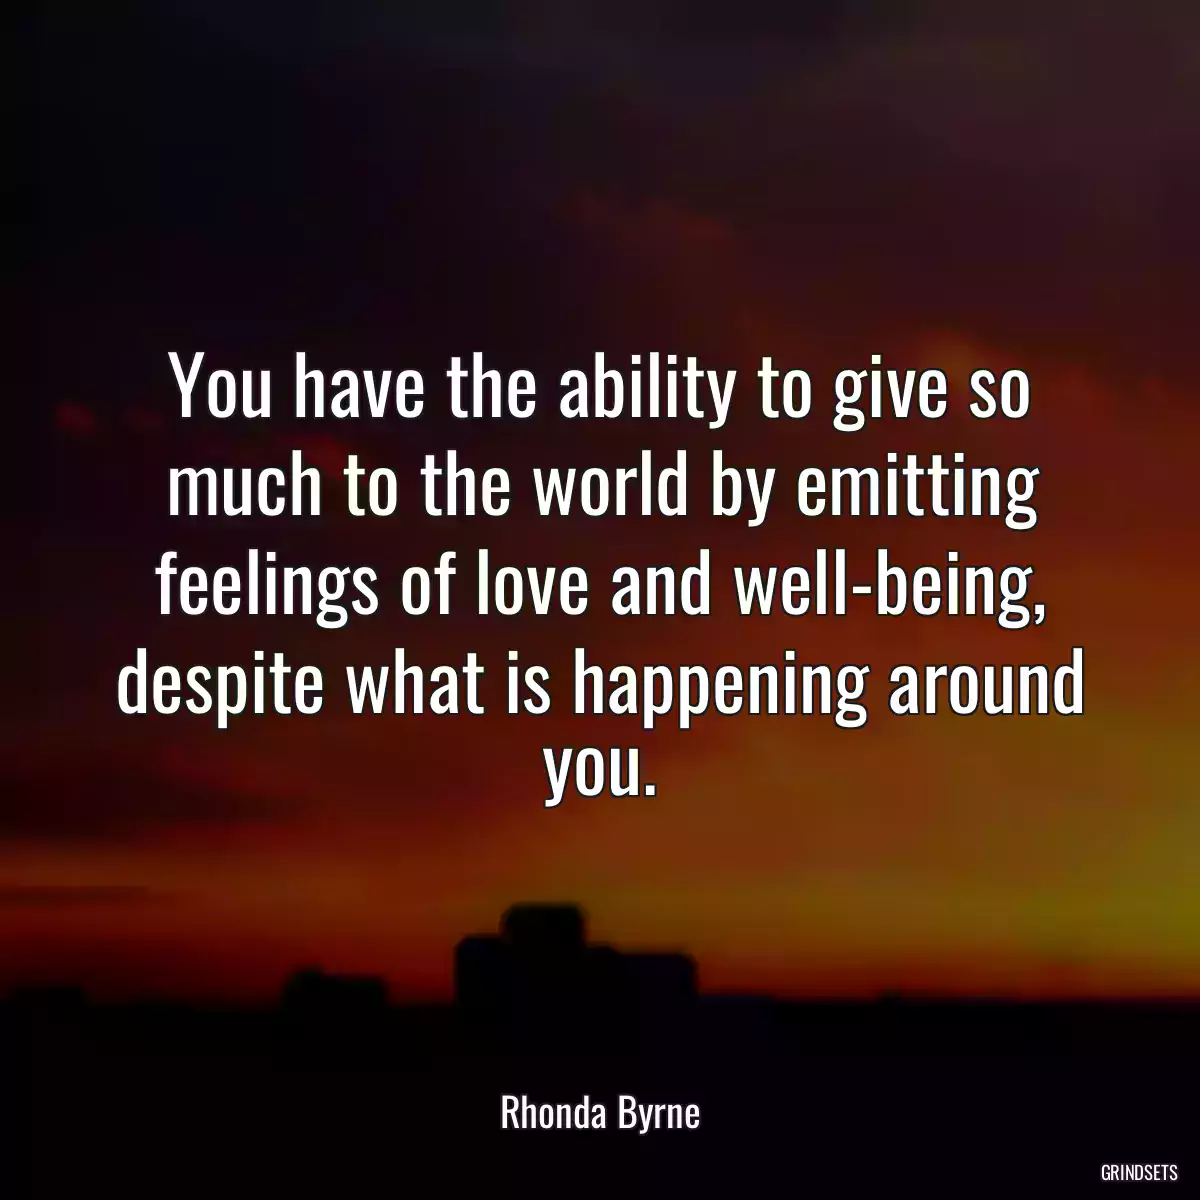 You have the ability to give so much to the world by emitting feelings of love and well-being, despite what is happening around you.